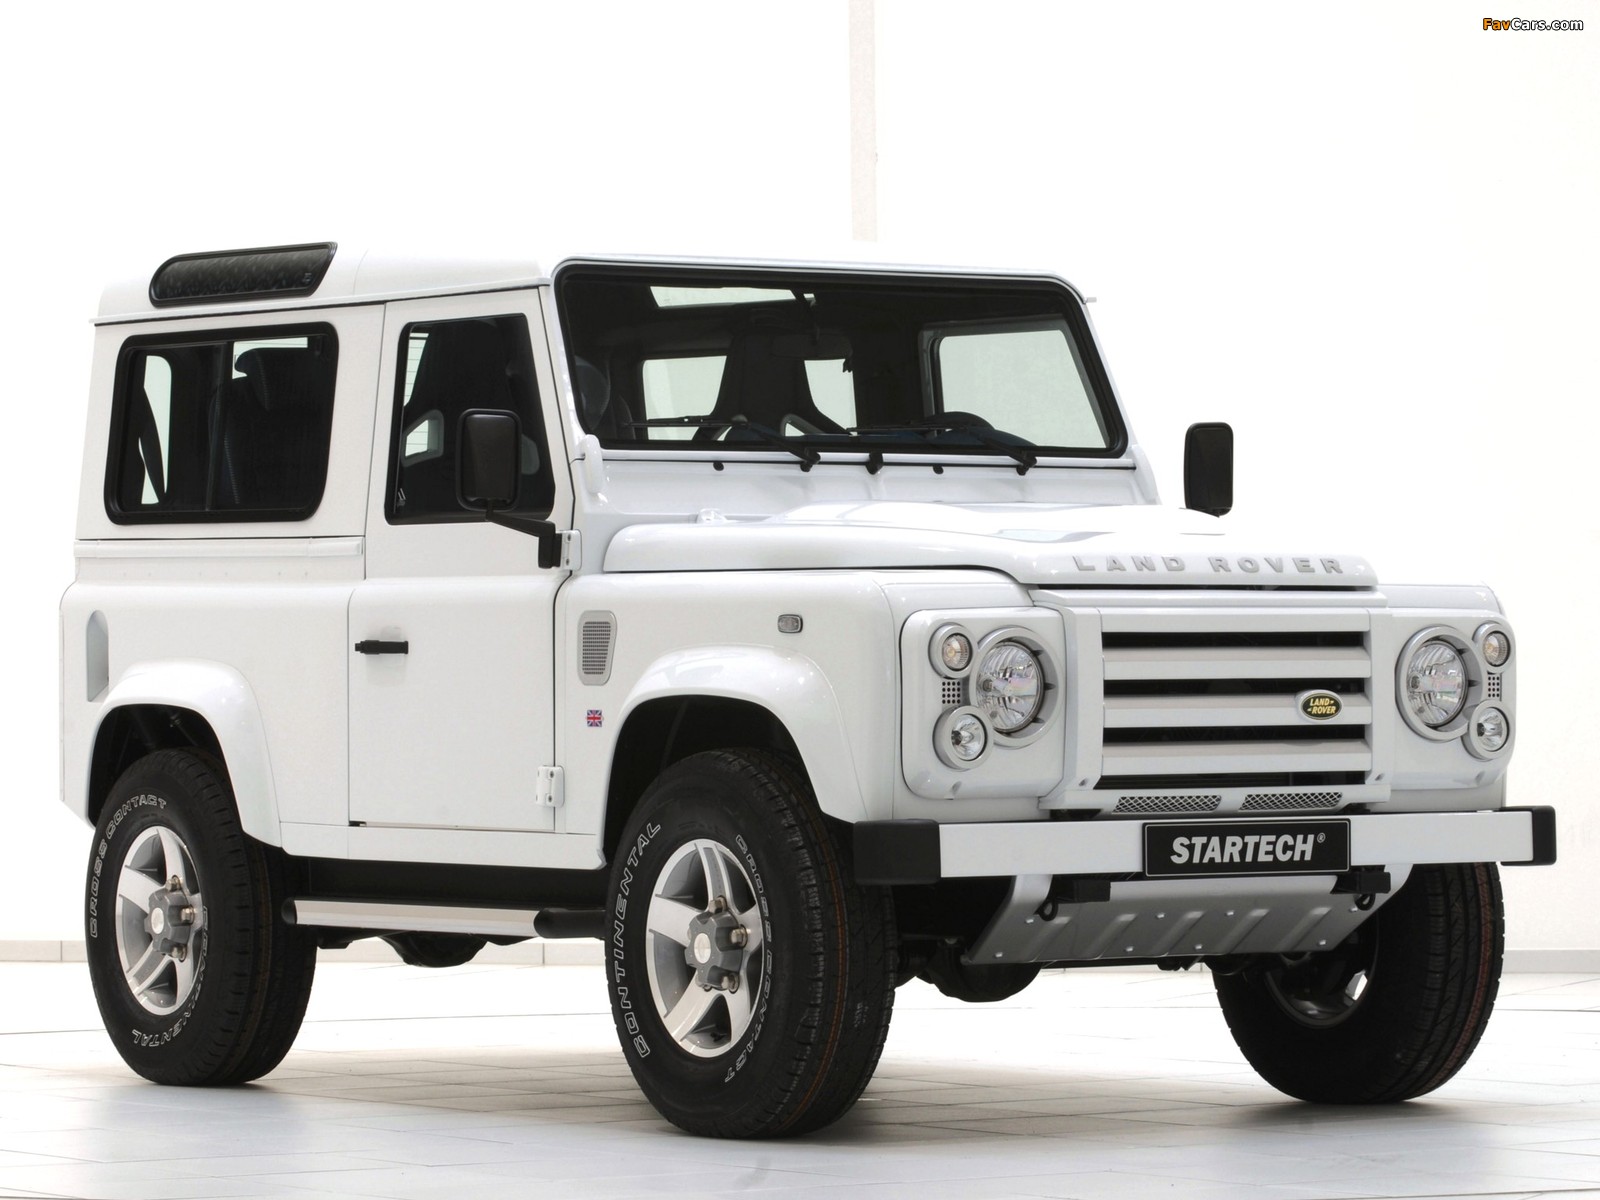 Startech Land Rover Defender 90 Yachting Edition 2010 pictures (1600 x 1200)